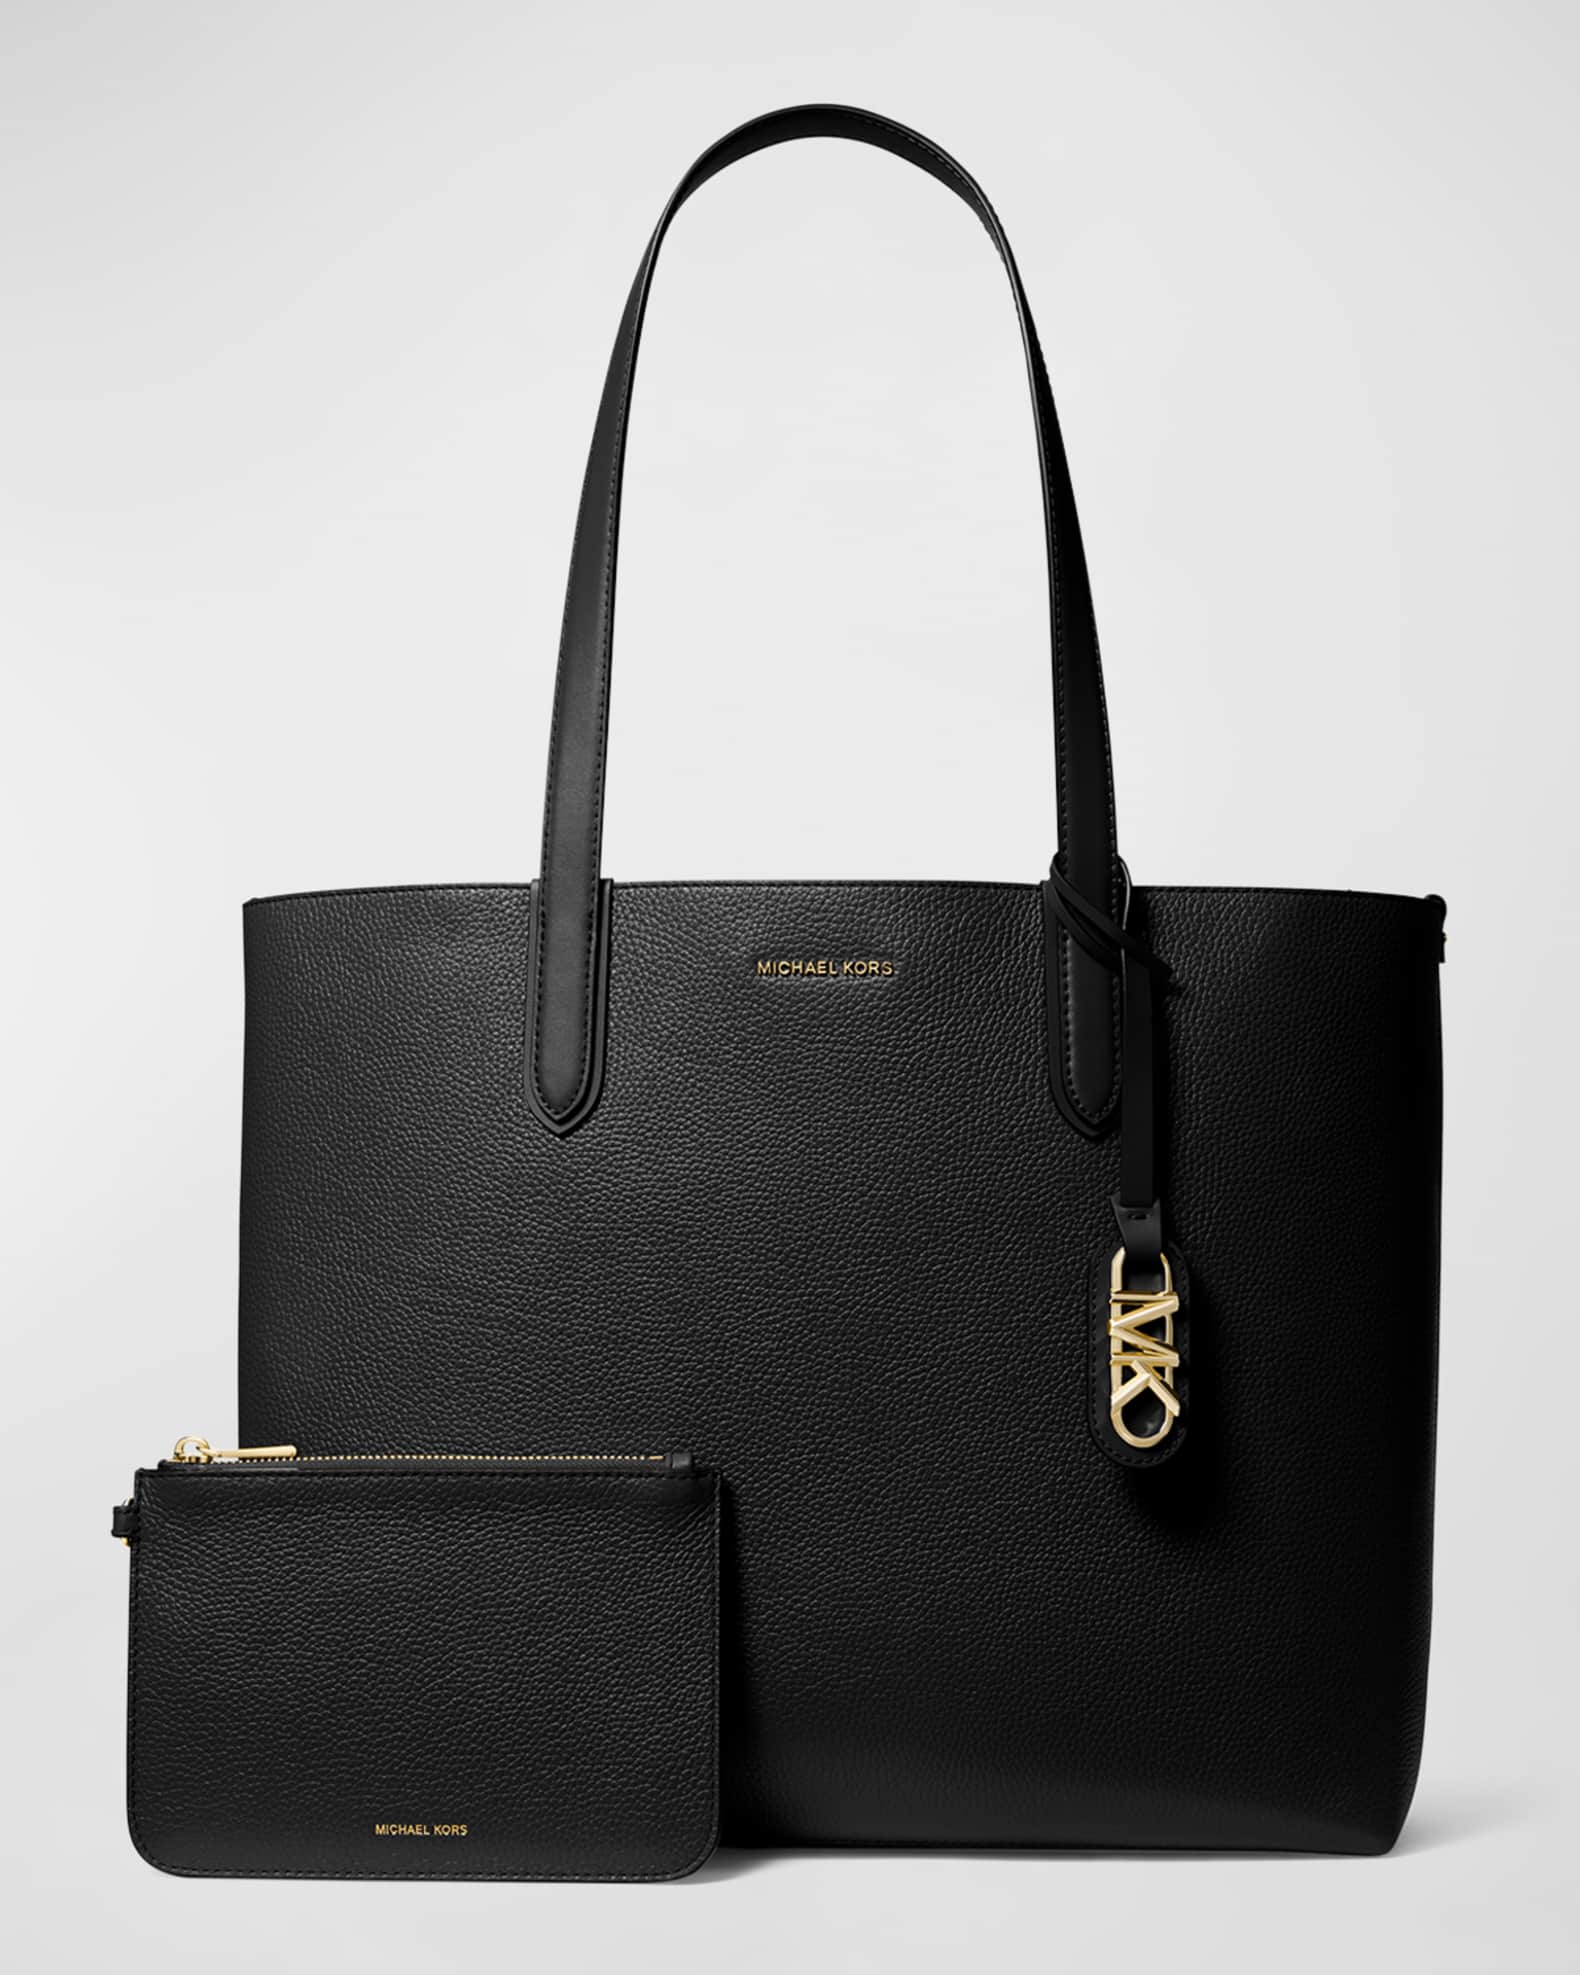 INTRODUCING LATEST MICHAEL KORS TOTE BAG WITH SIGNATURE BRANDING